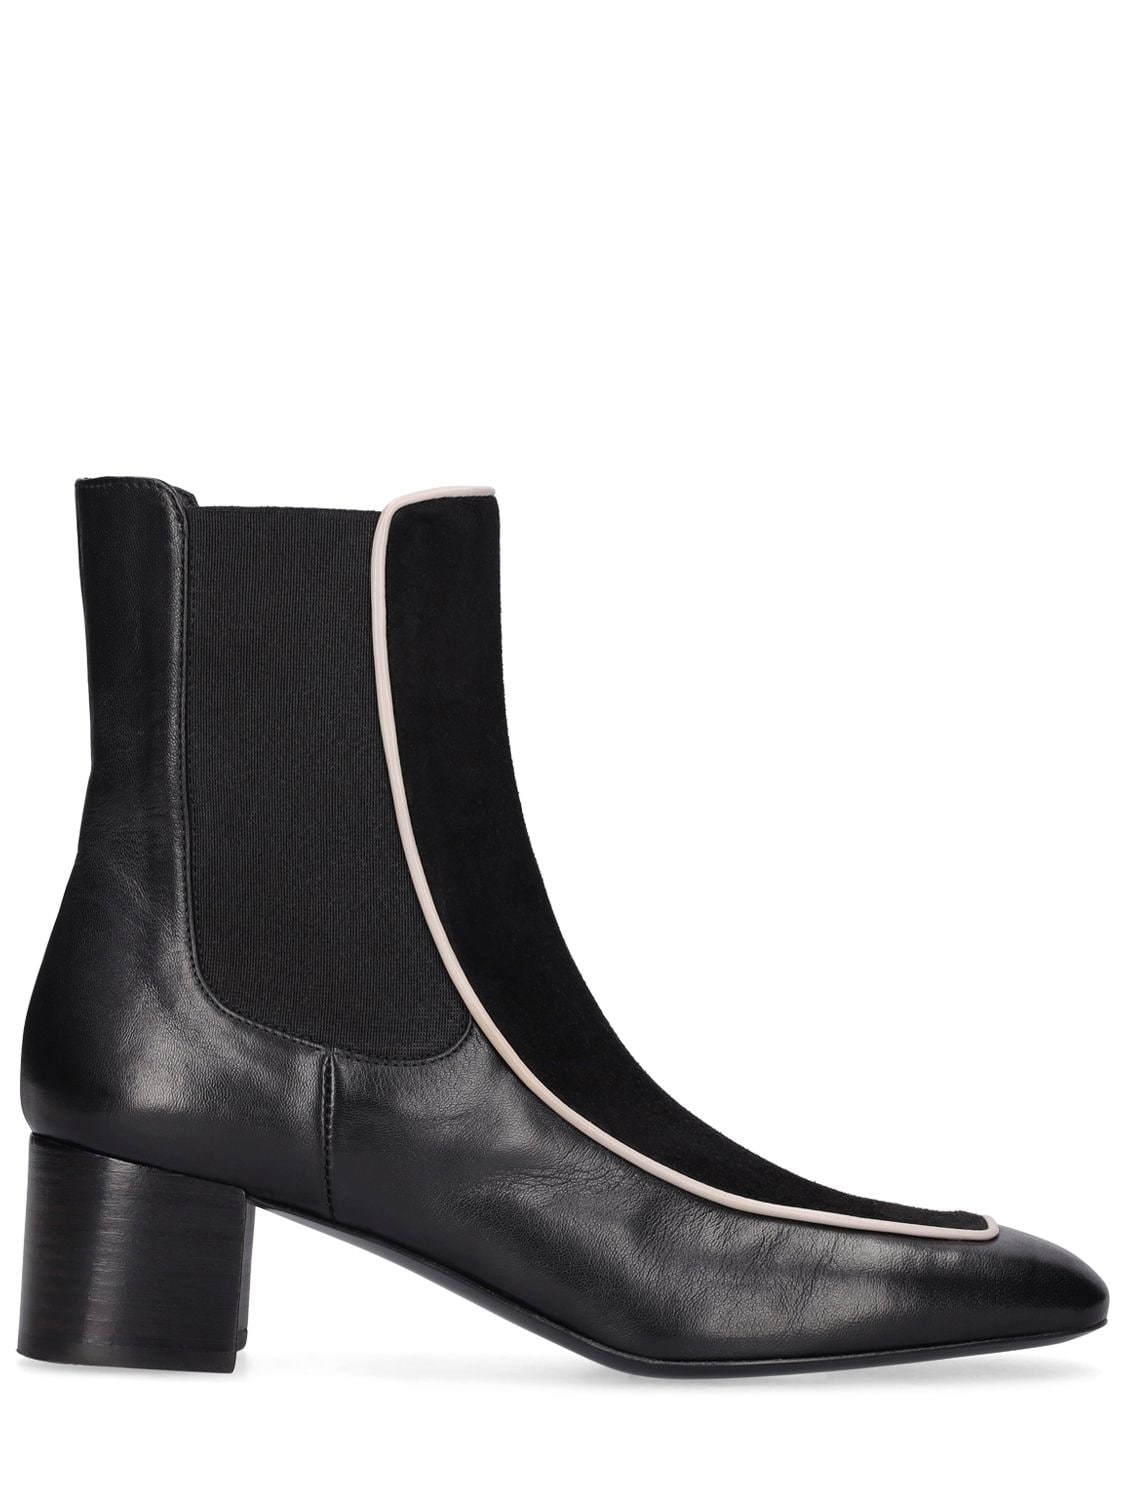 TOTÊME 50MM THE BLOCK HEEL LEATHER ANKLE BOOTS